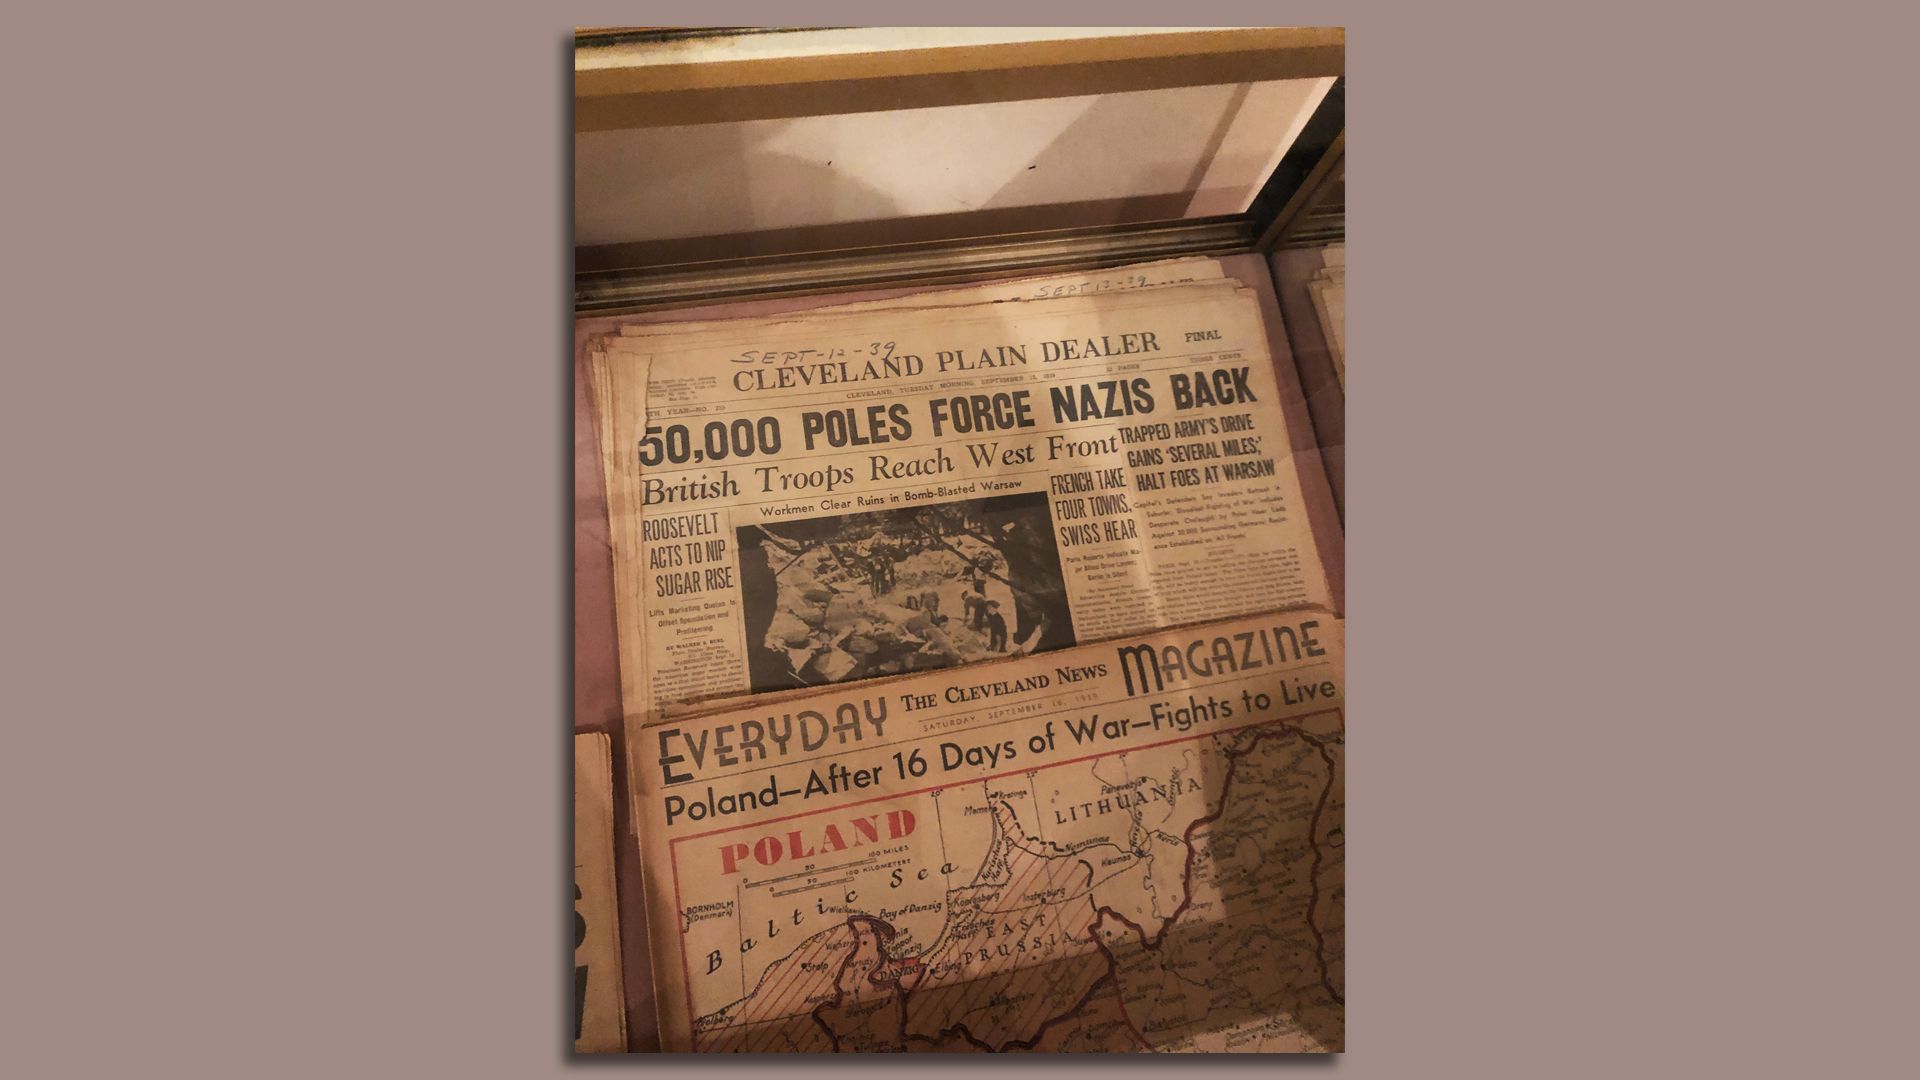 Cleveland newspapers from 1939 -- "50,000 POLES FORCE NAZIS BACK" -- in a glass case. 